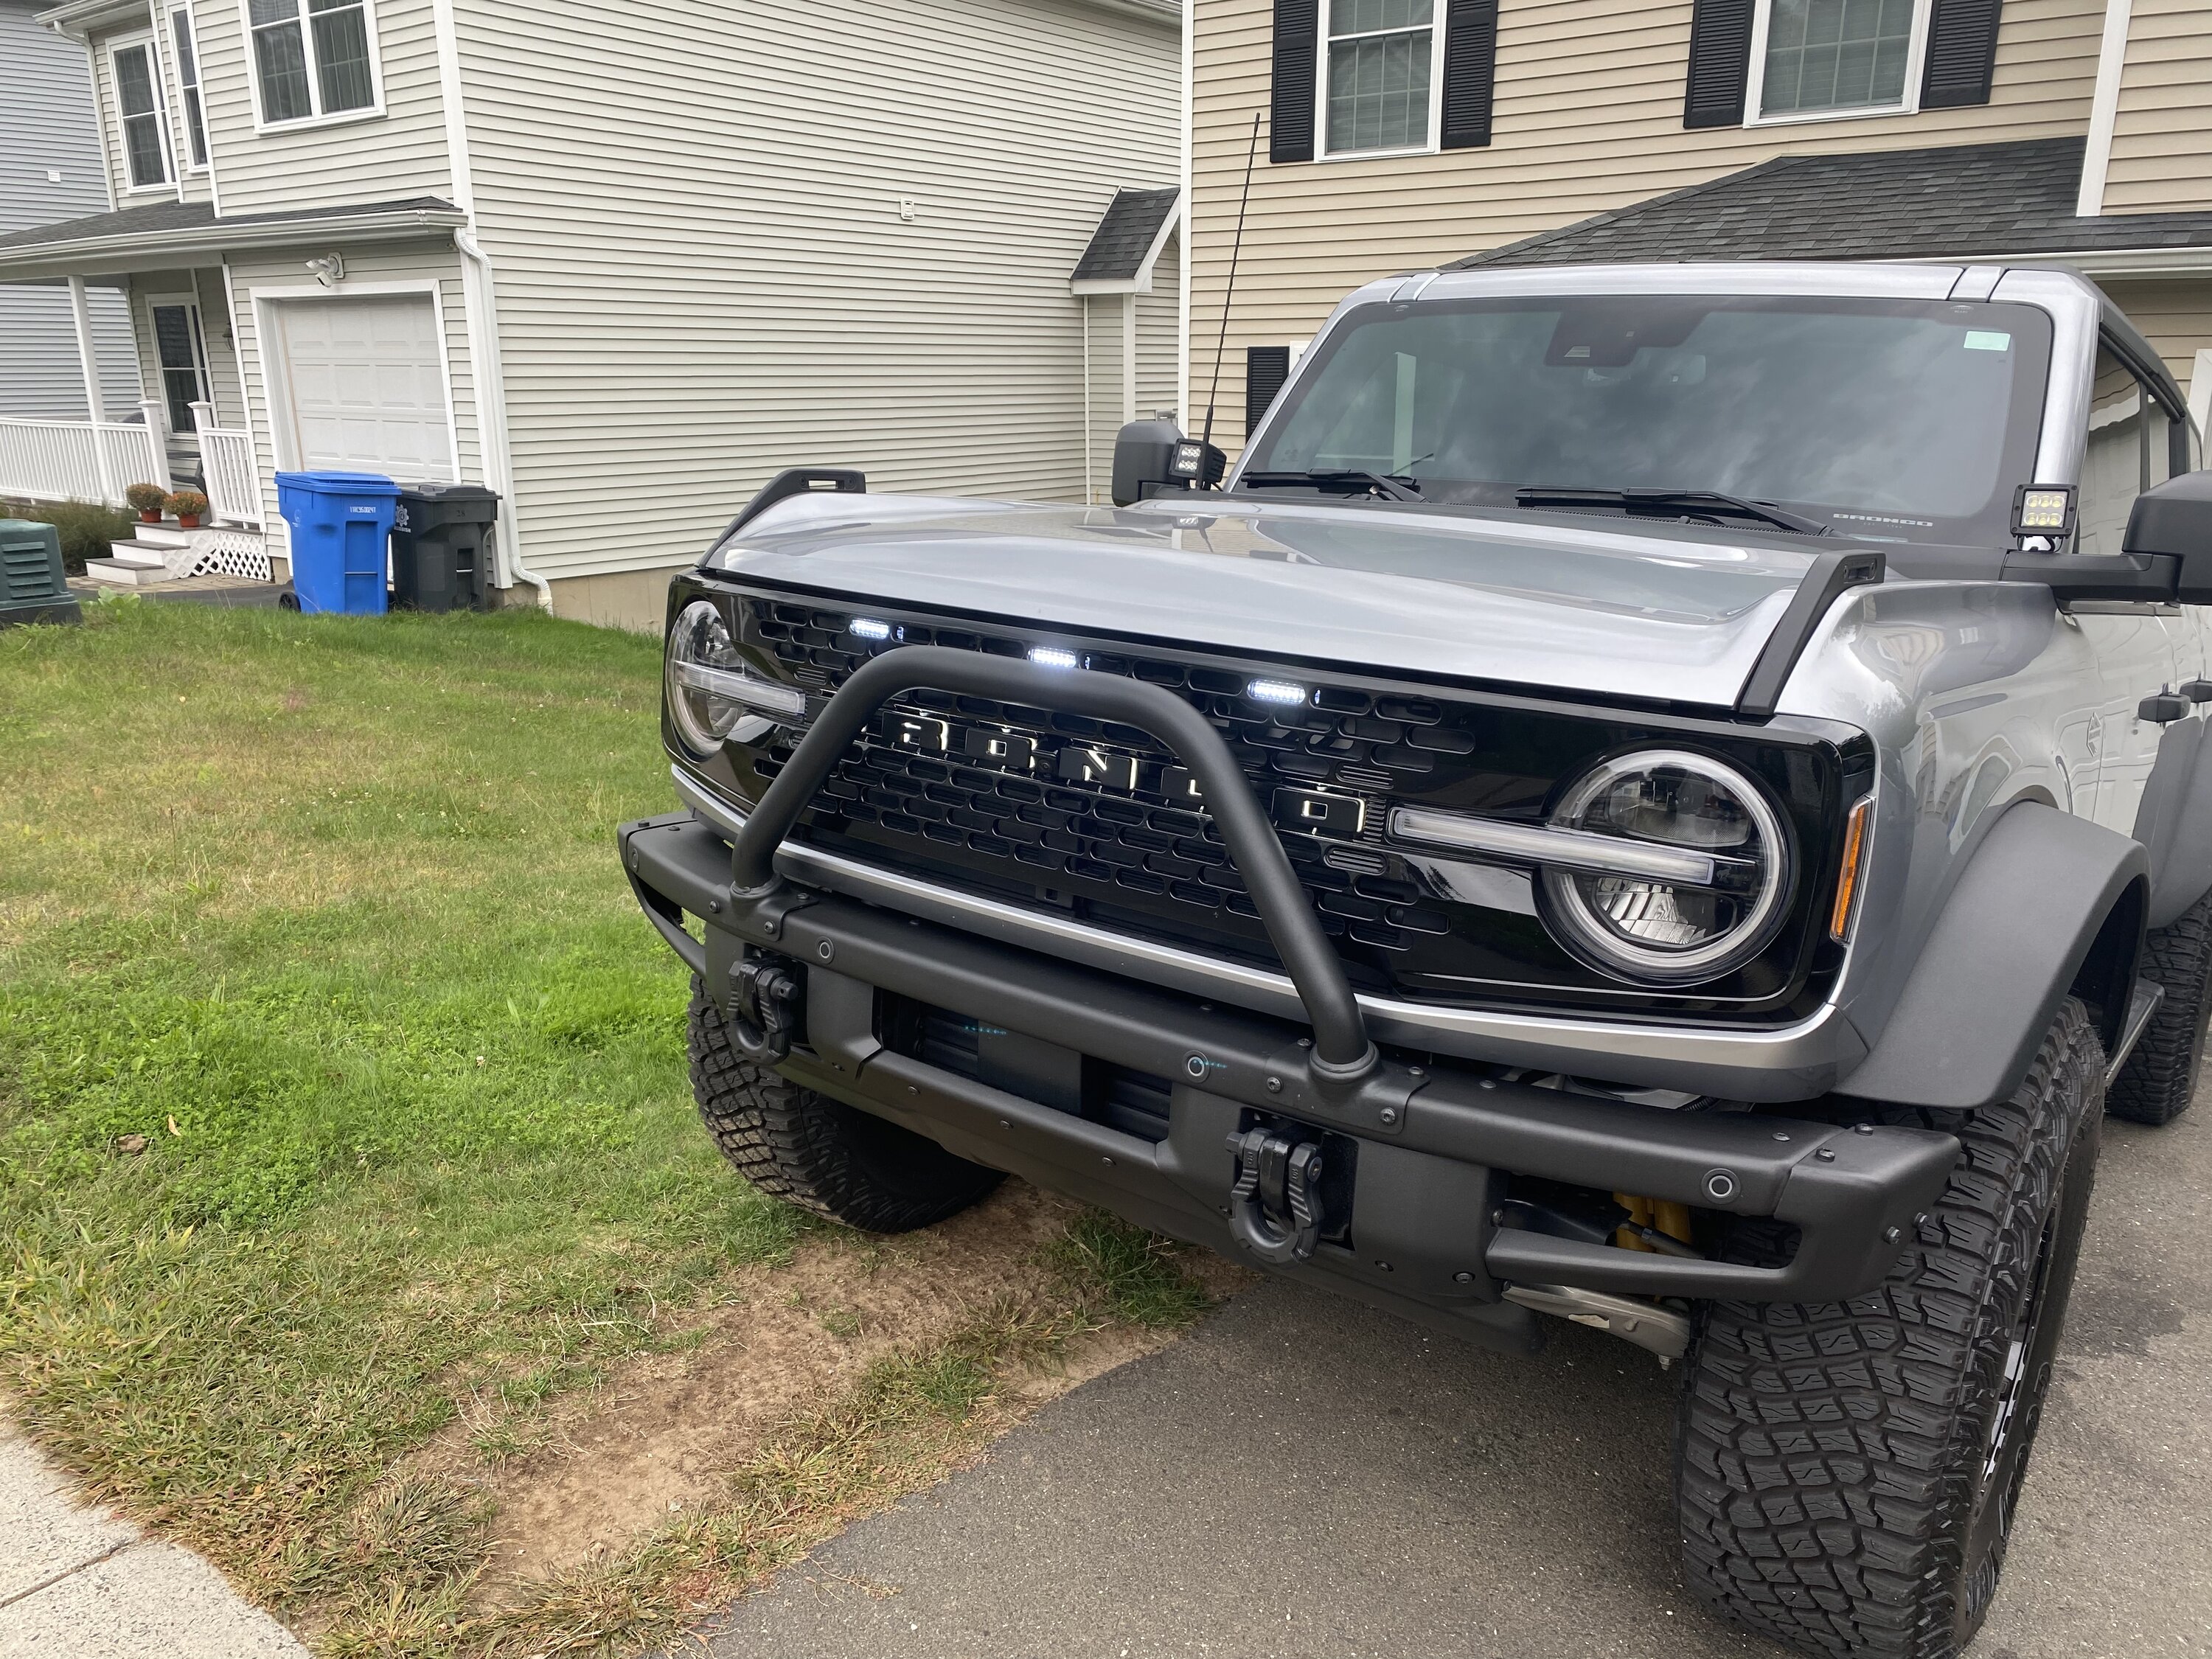 Ford Bronco Opinions Needed / Raptor Marker Lights 32FD8855-3087-420A-8AE2-42B664D0CE82